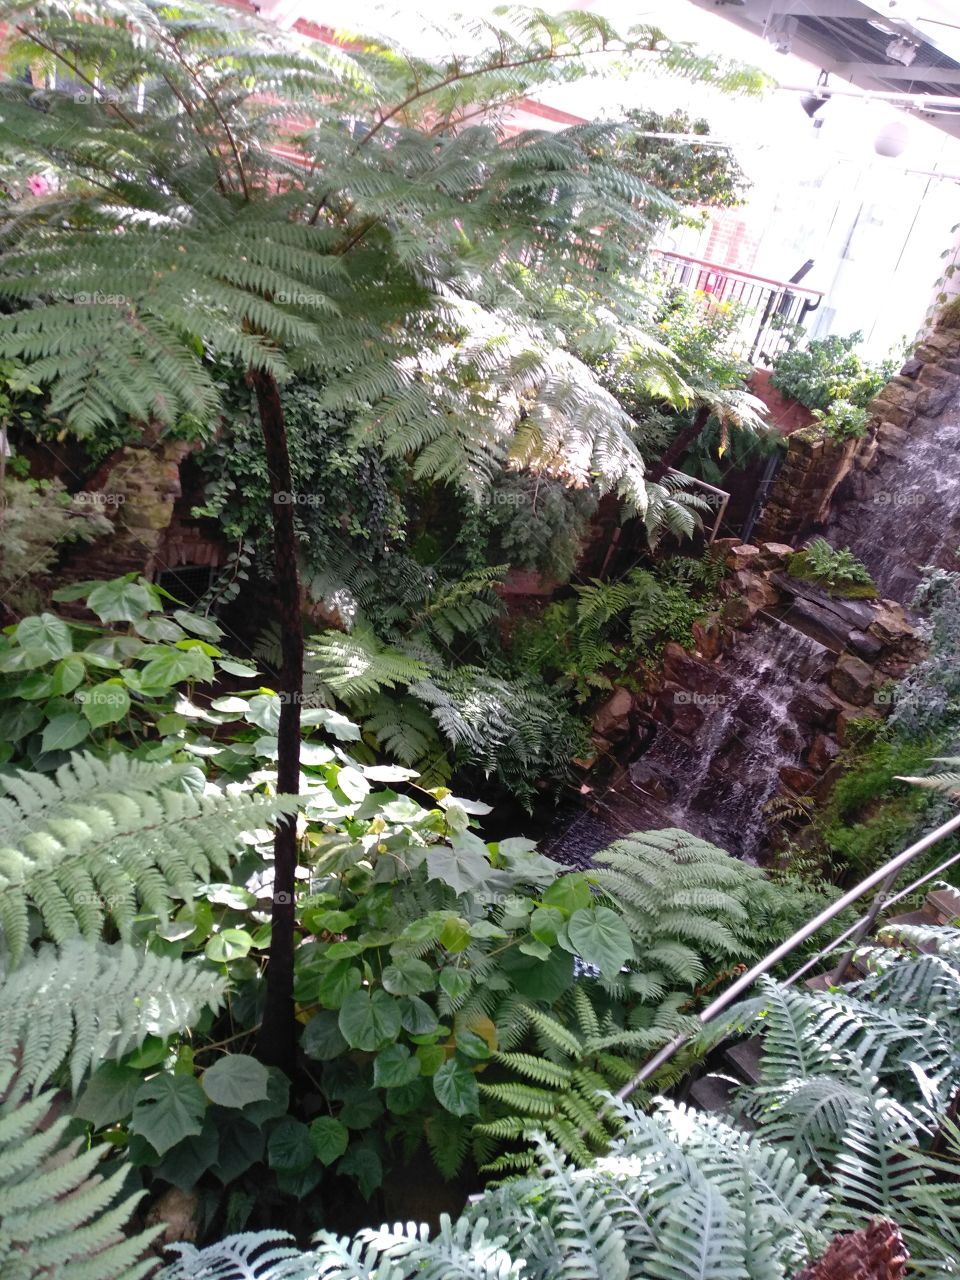 Exotic trees and plants surrounding a beautiful waterfall, trickling into a pond in Botanic Gardens, Belfast